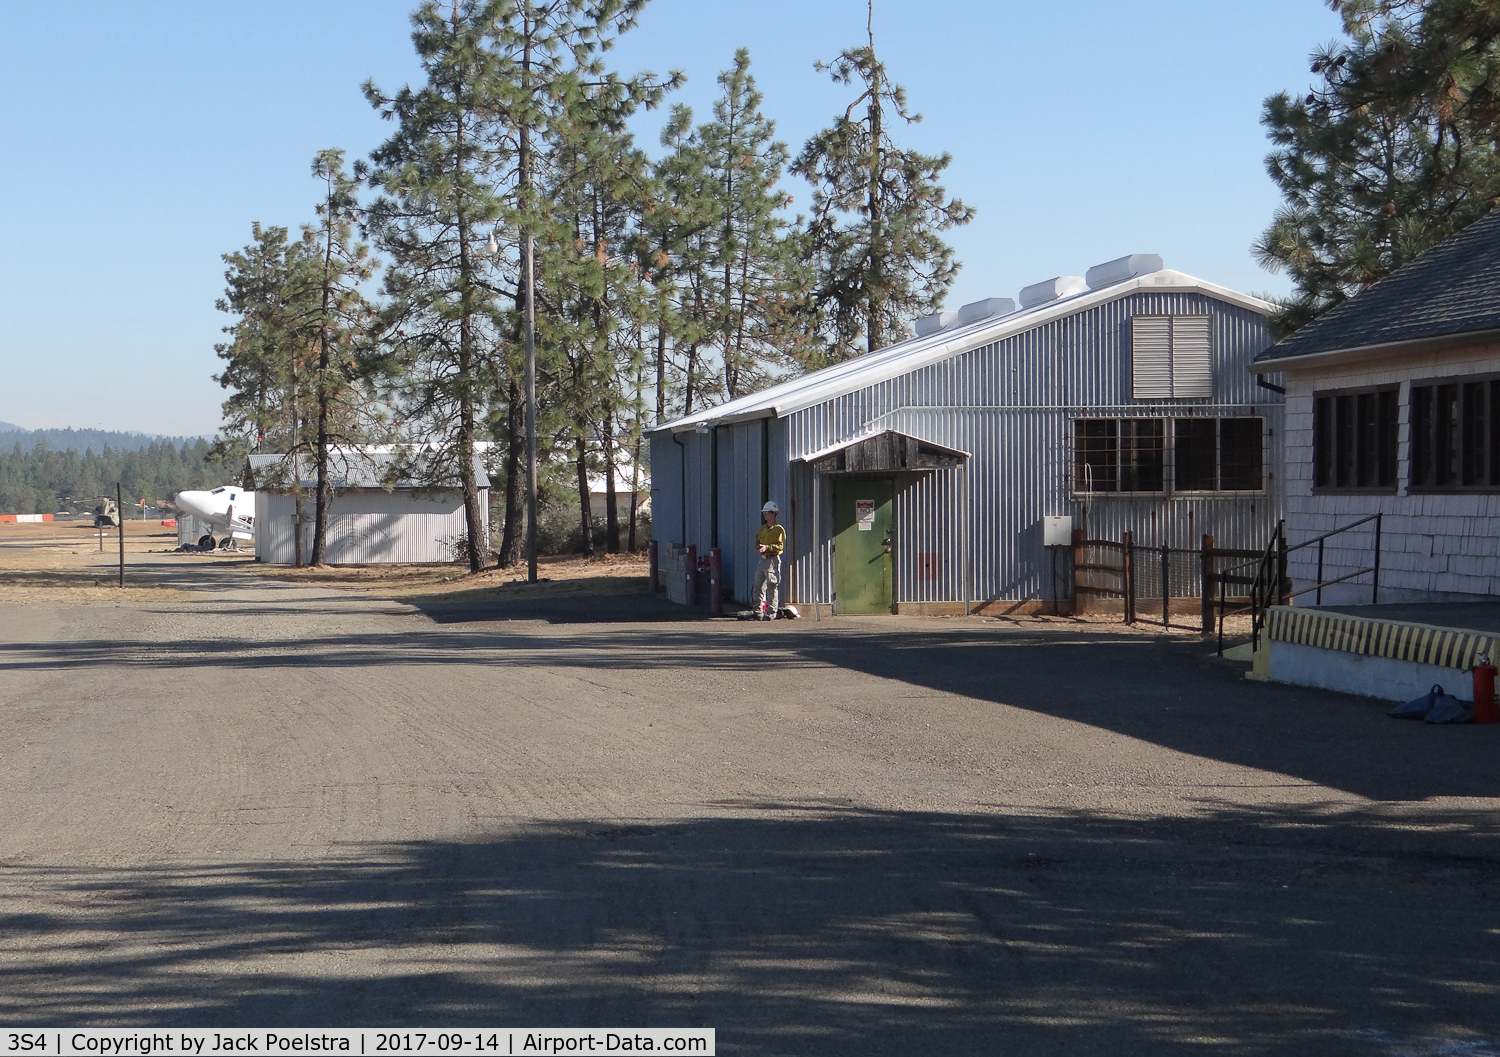 Illinois Valley Airport (3S4) - Illinois Valley airport OR, known as Siskiyou Smokejumpers base